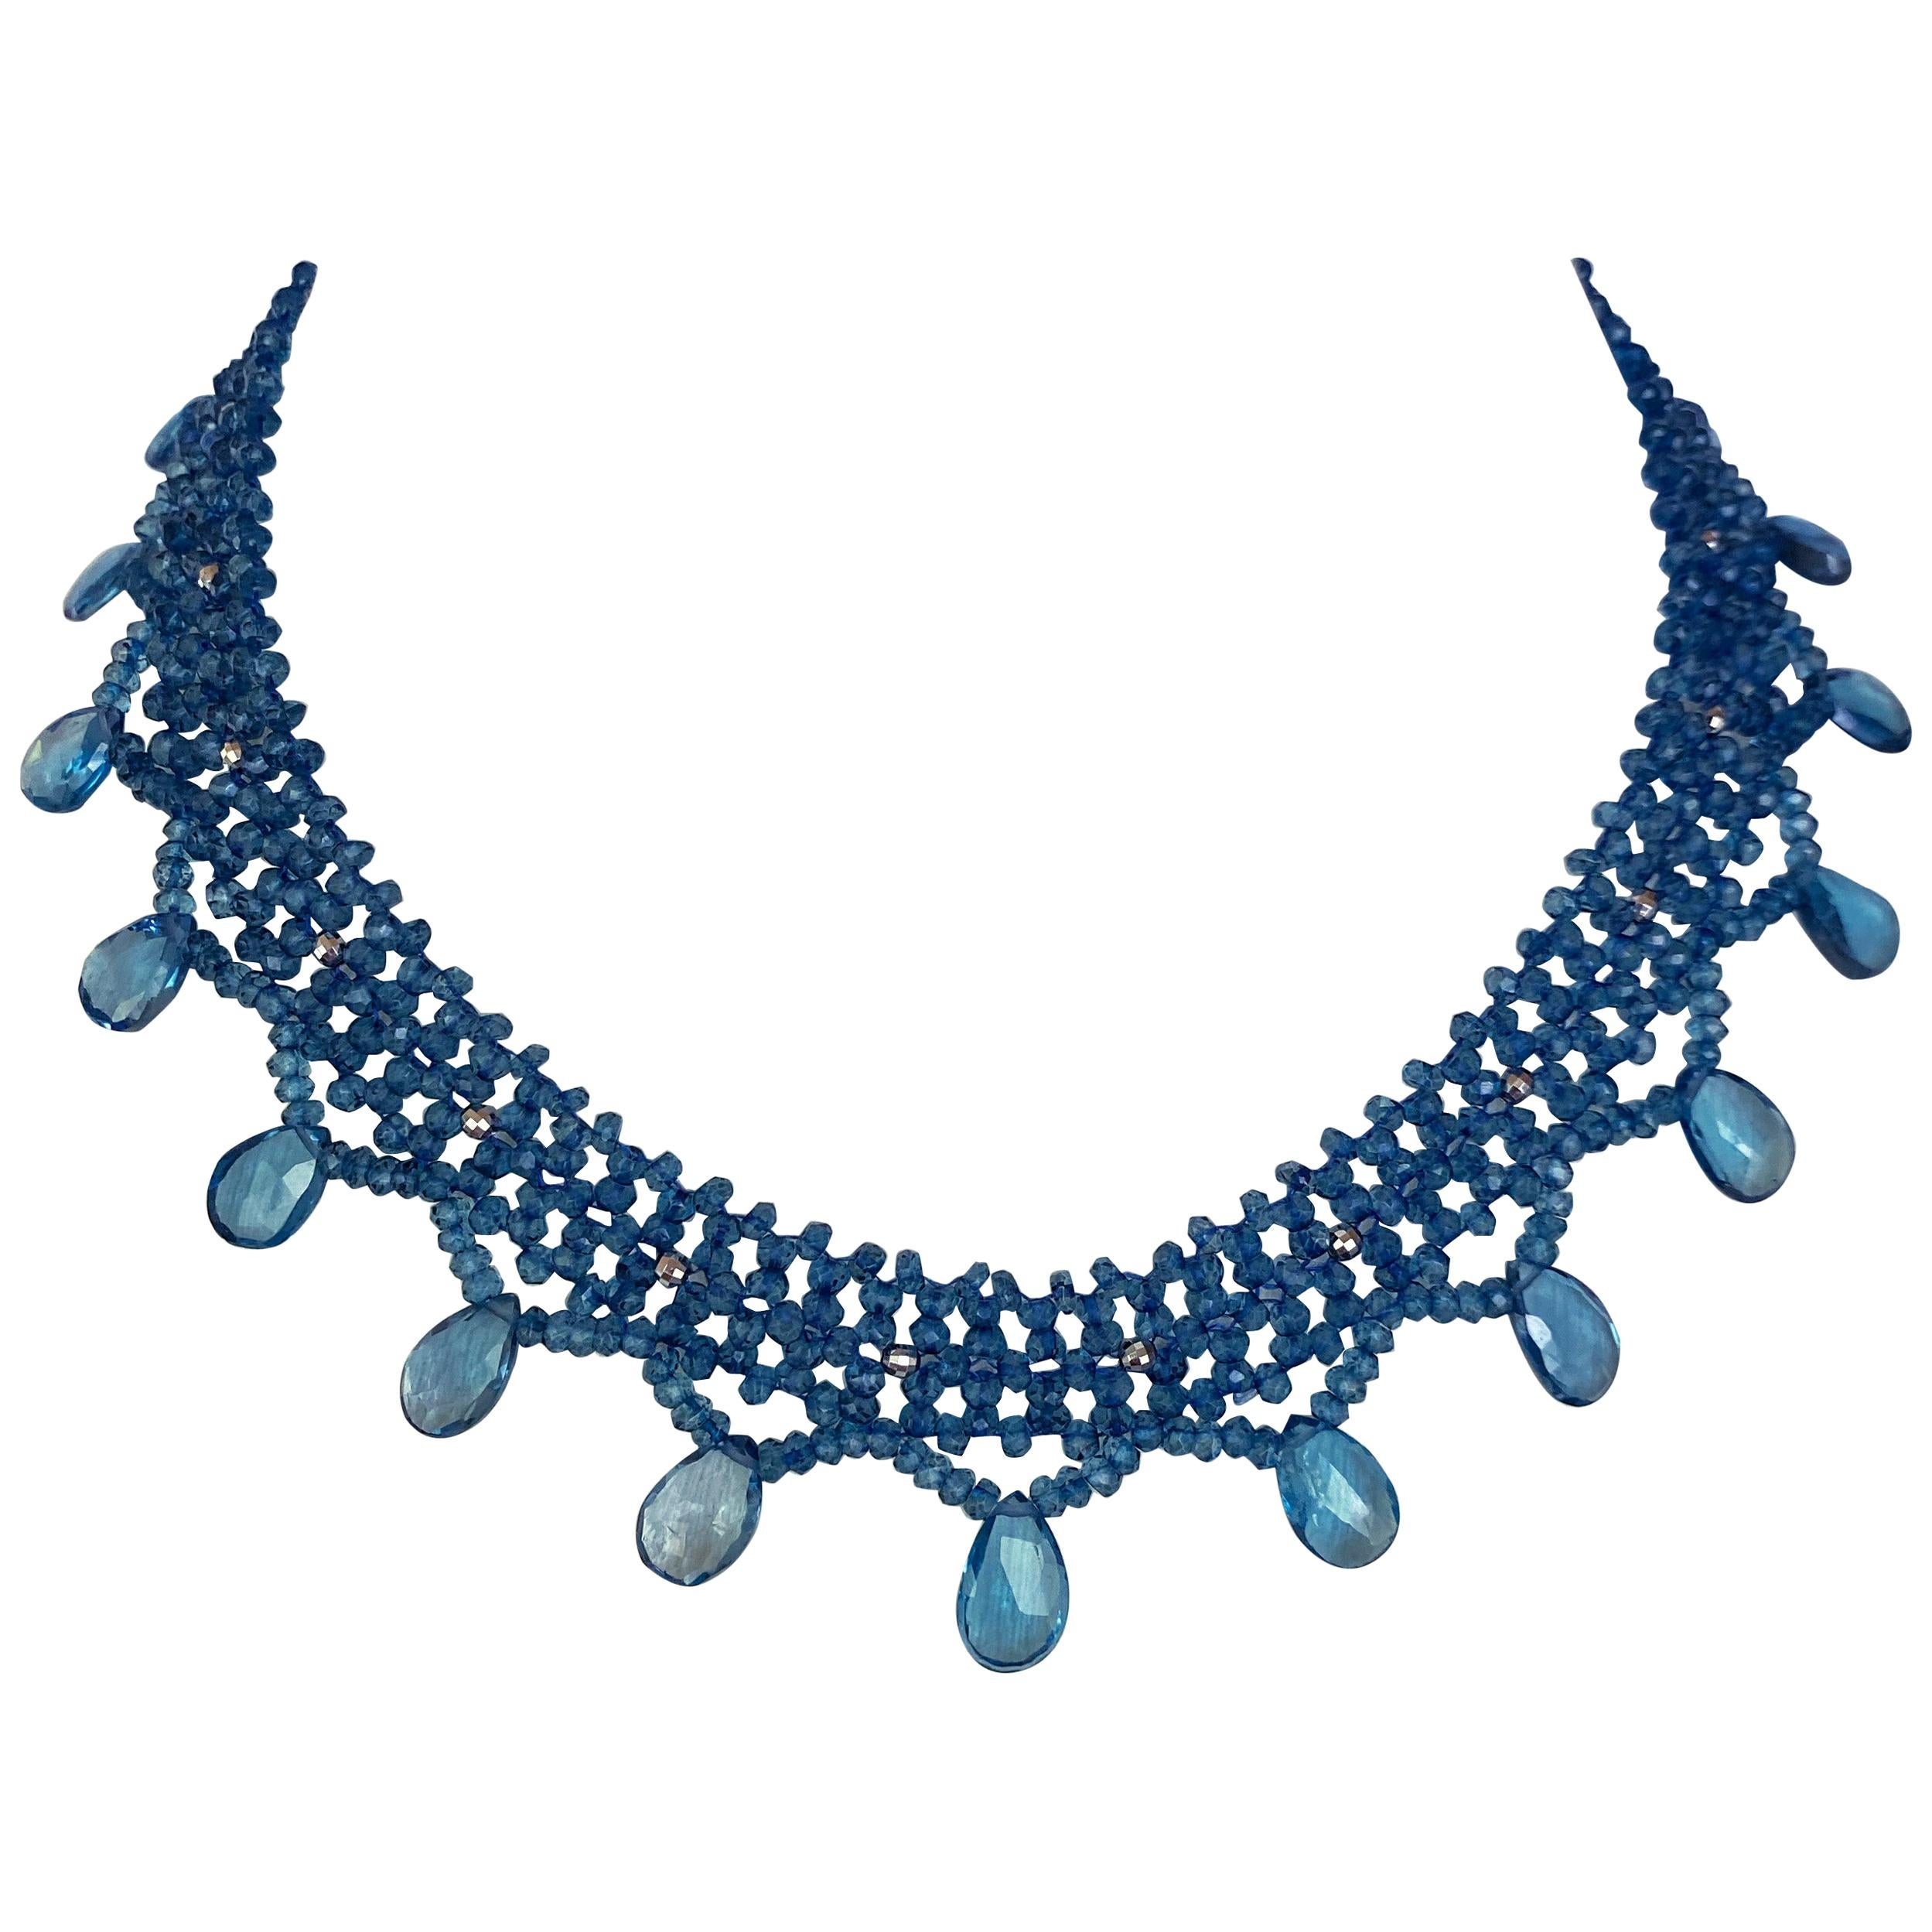 Marina J Woven London Blue Topaz beaded necklace with faceted Briollettes 